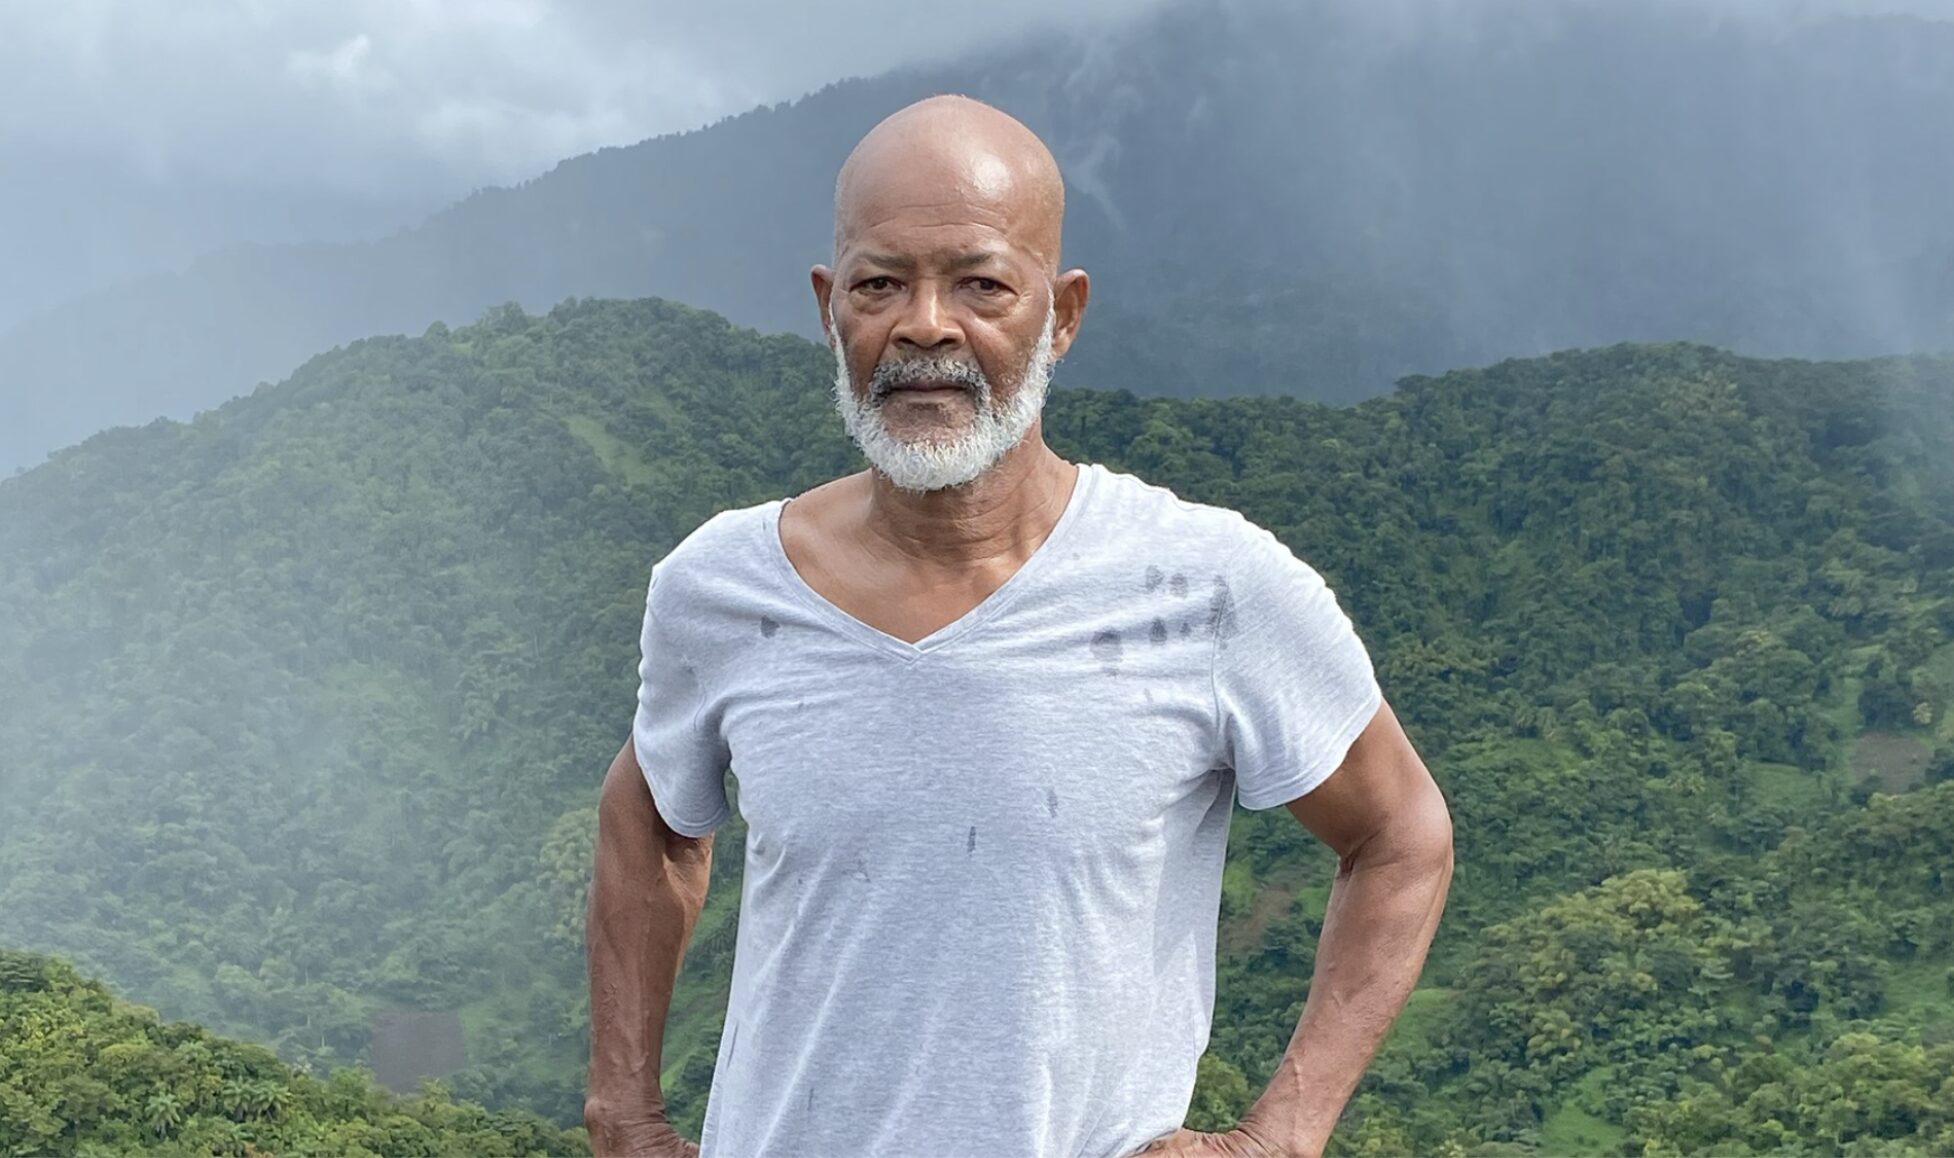 Percy Lampkin, who watched the La Soufrière volcano erupt from his bedroom window on the island of St. Vincent in 2021. 